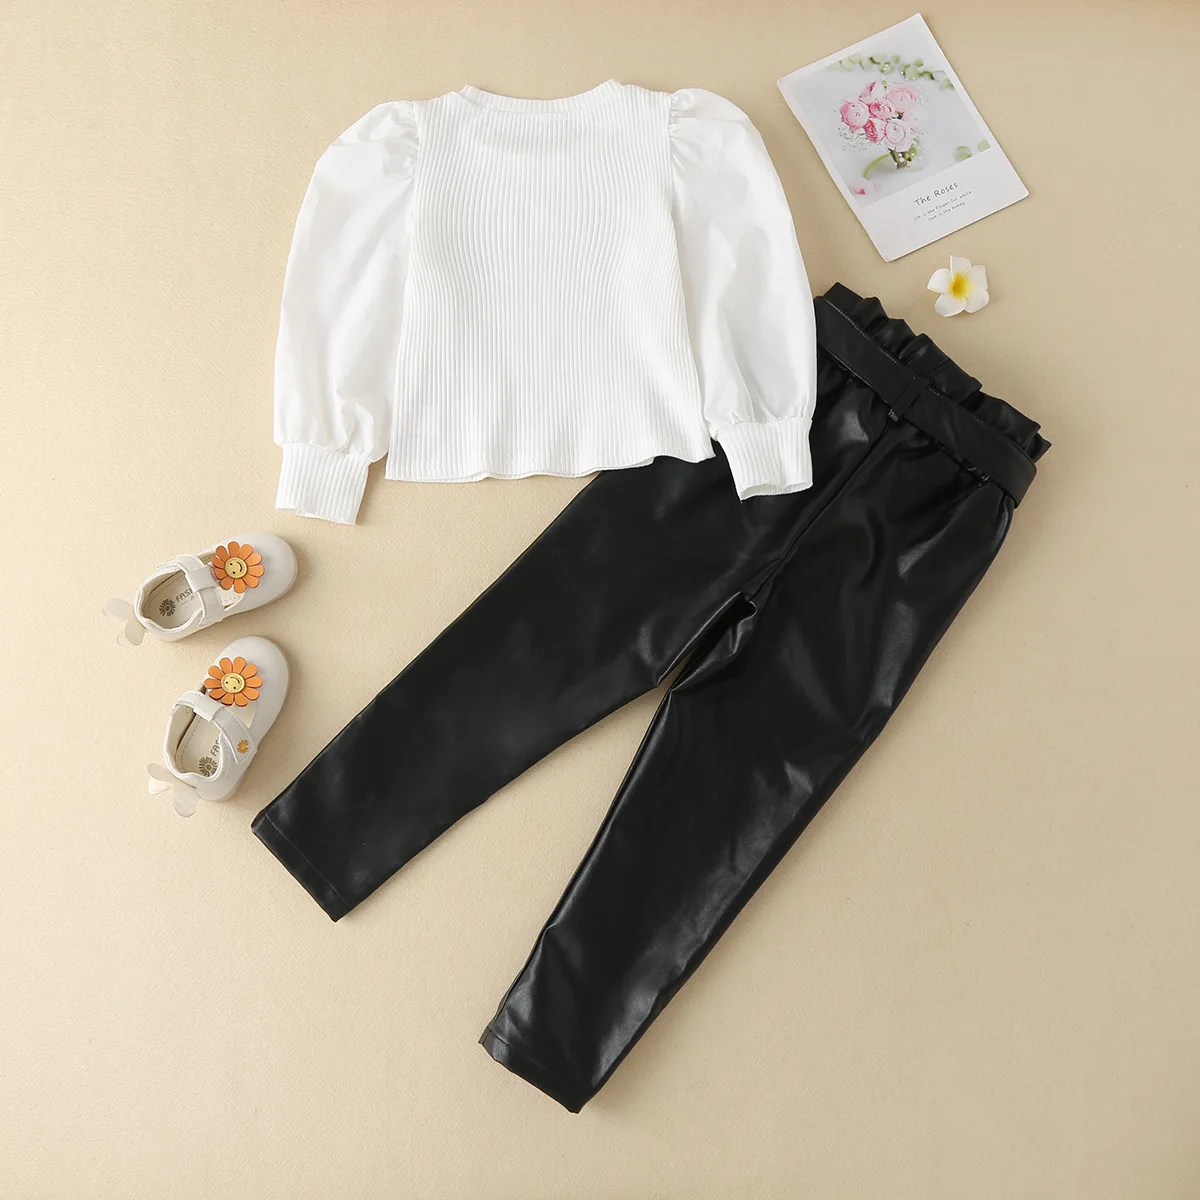 

New fashion 2Pcs girls clothing set puff sleeve solid rib shirt + solid PU leather pants outfits for girls, Picture shows